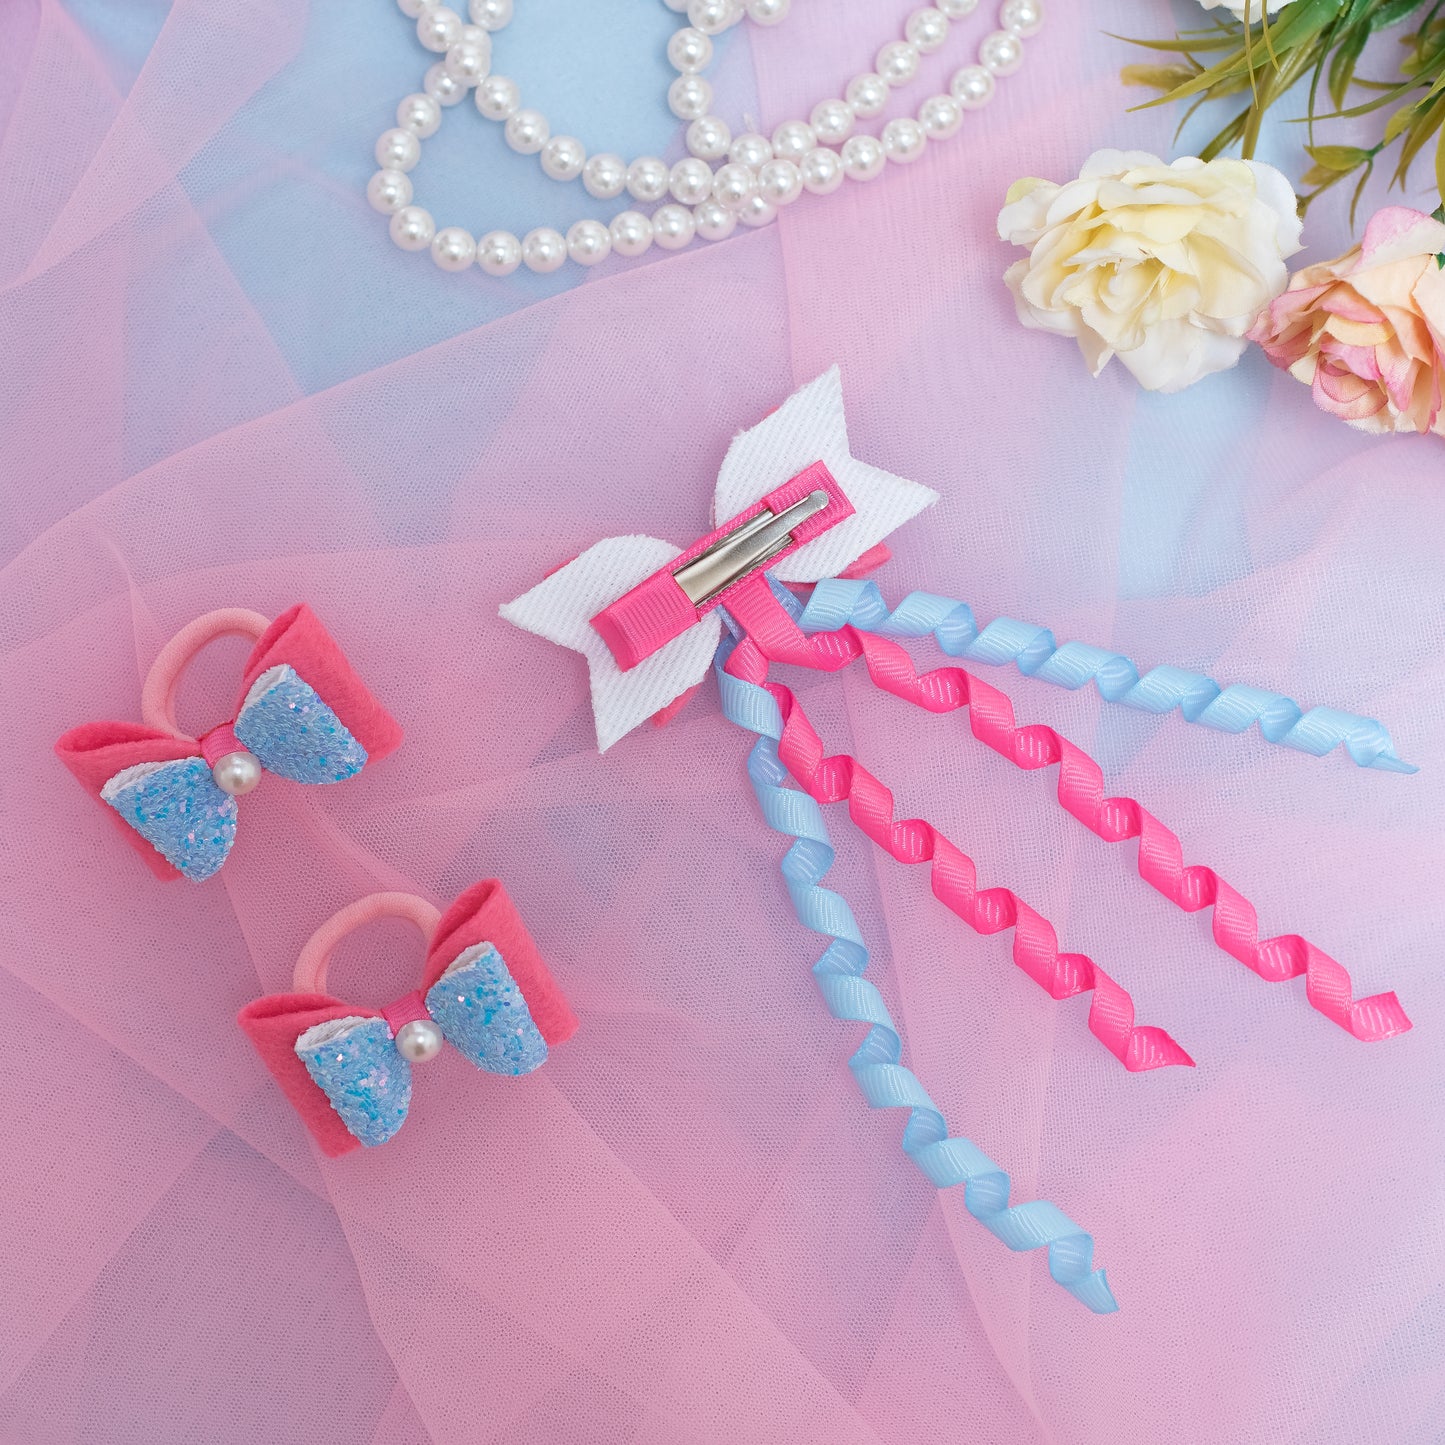 Combo: 1 Dangler Hair-pin and 2 Rubberbands with Fancy Shimmer Bow for Party -  Blue, Pink (Set of 1 pair Rubberbands , 1 Dangler on Alligator clip = 3